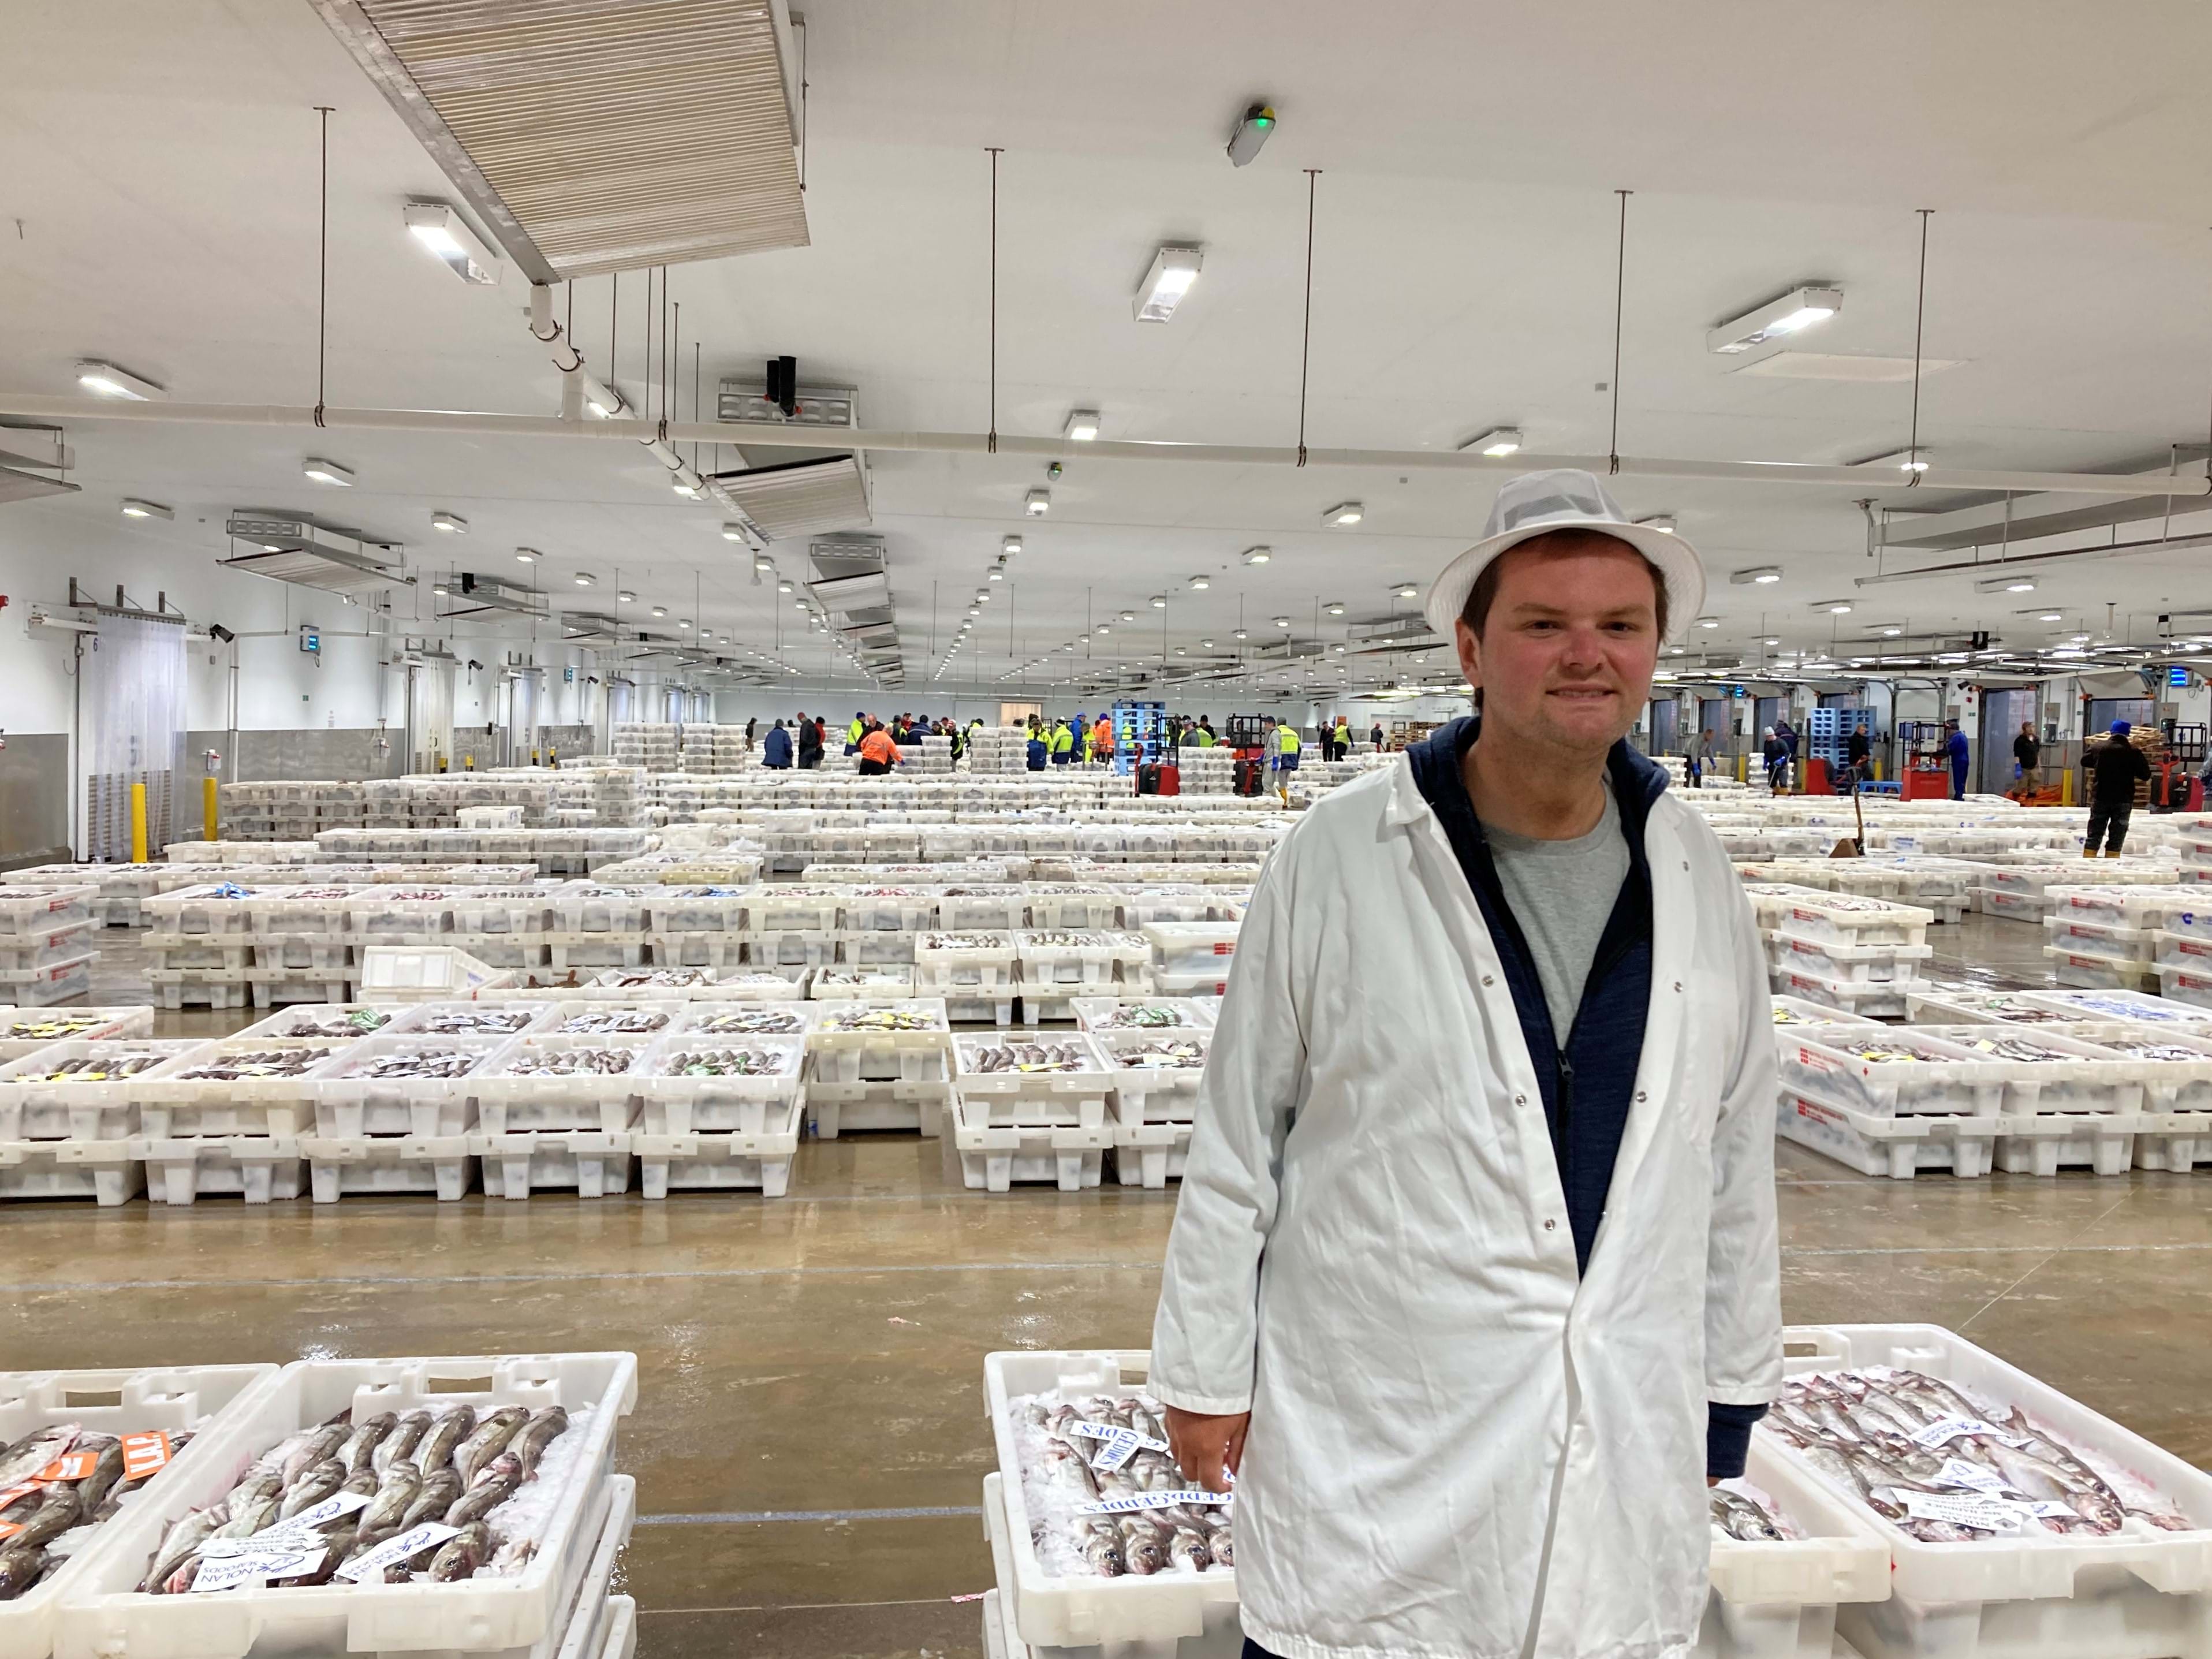 Jack standing in the fish market in front of stacked fish boxes